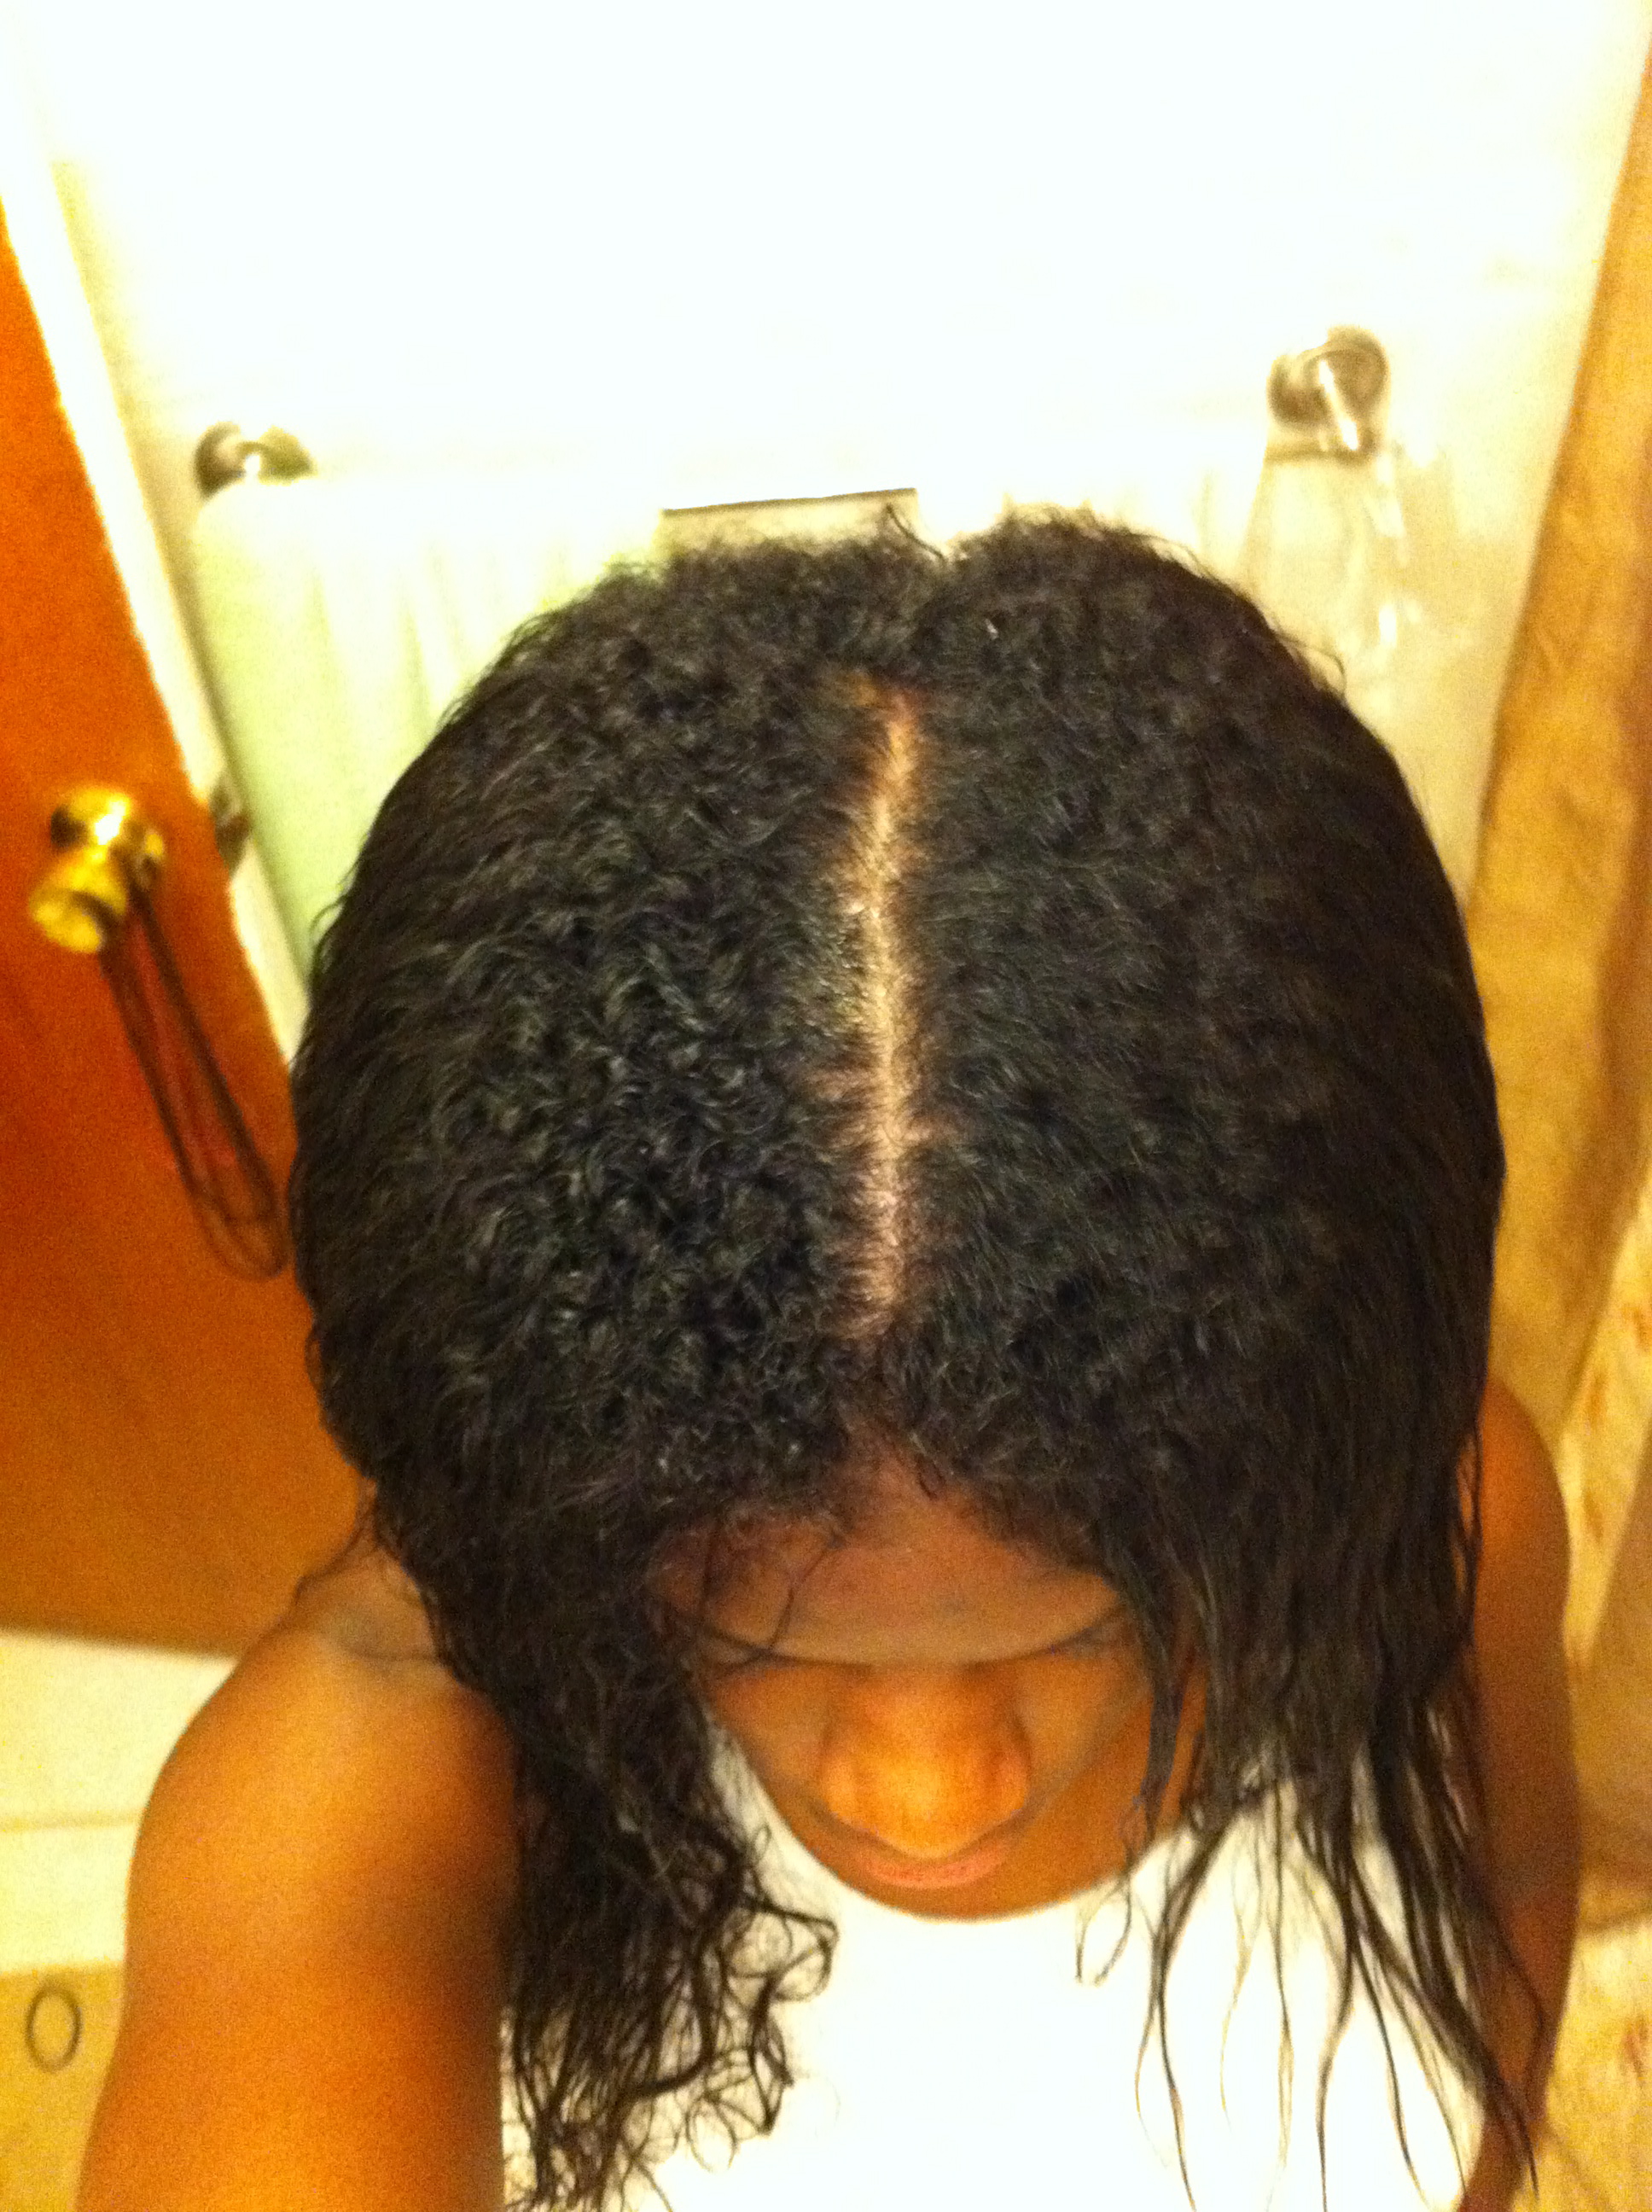 September 25, 2010 – 6 months of new growth on wet hair.